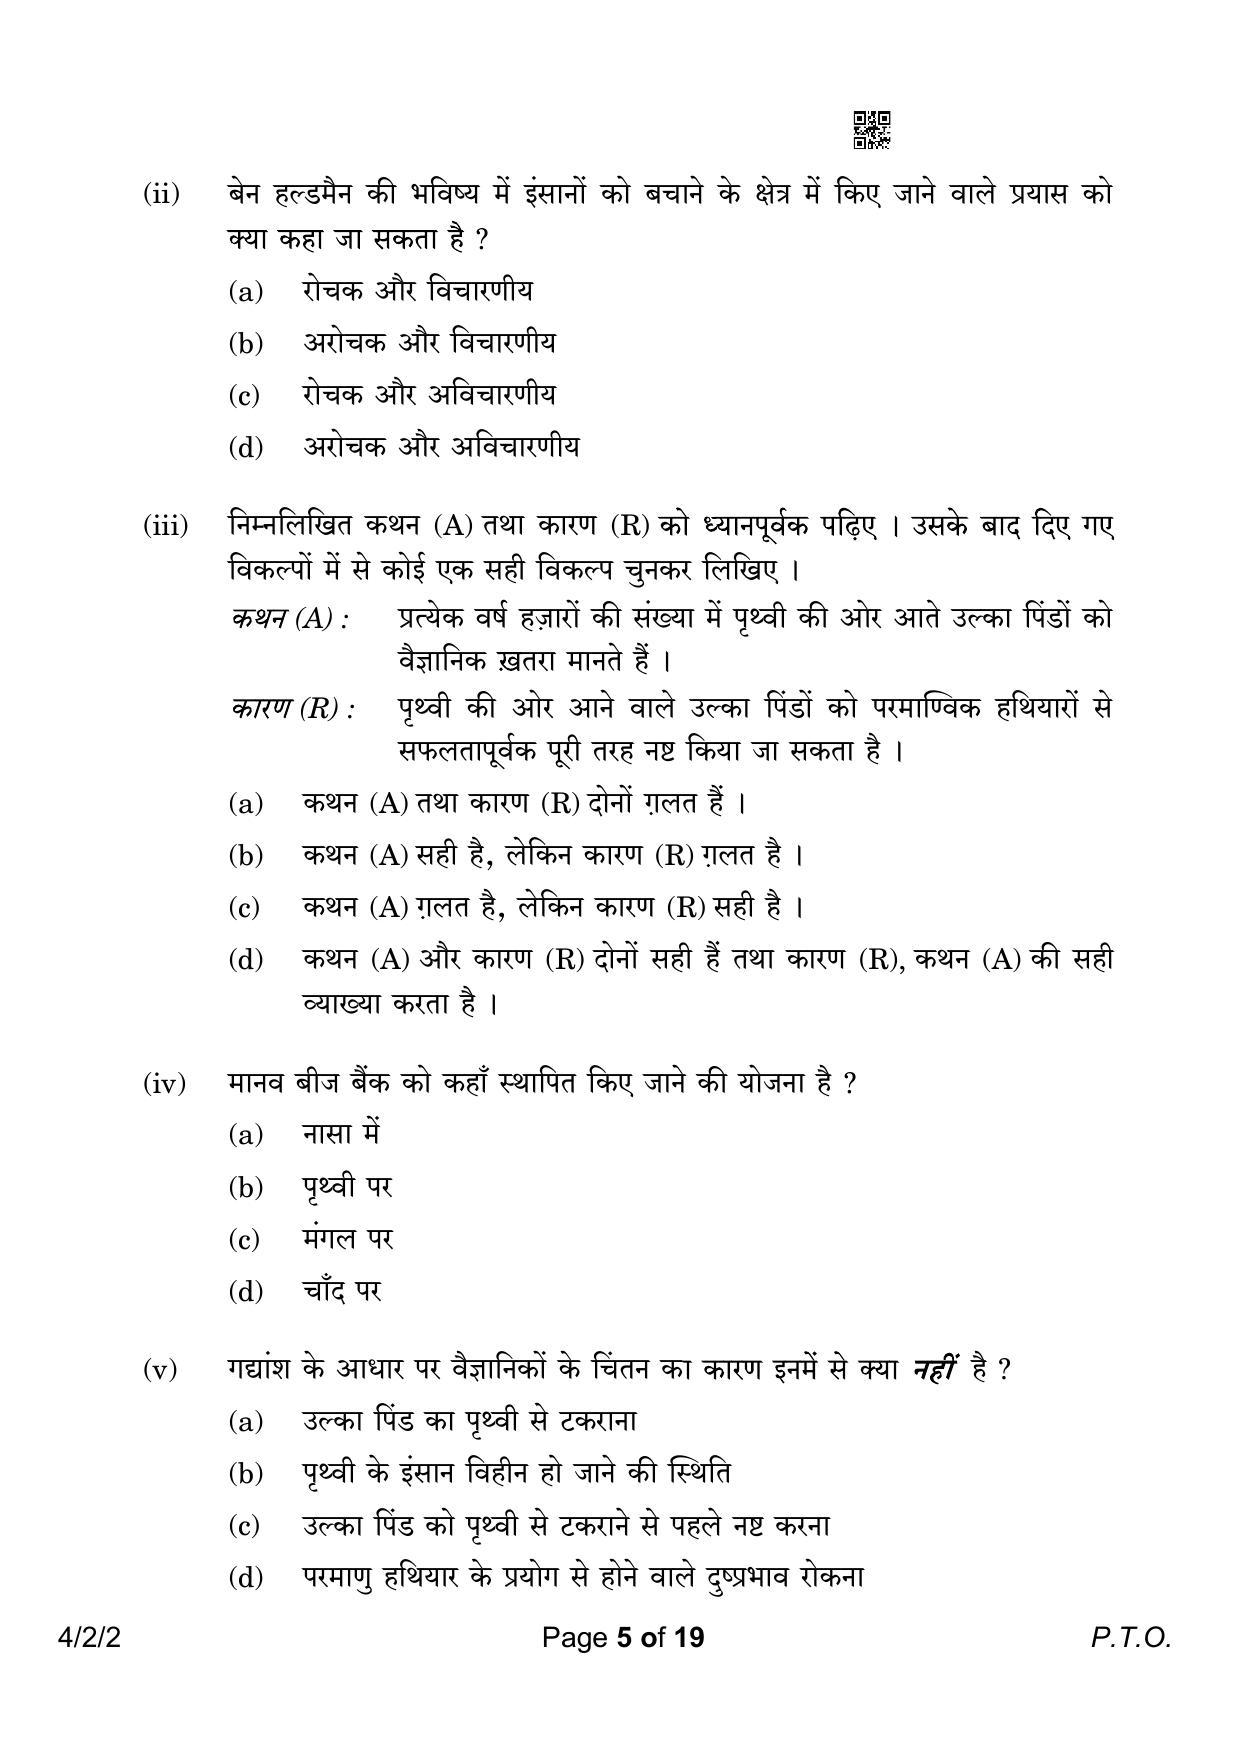 CBSE Class 10 4-2-2 Hindi B 2023 Question Paper - Page 5